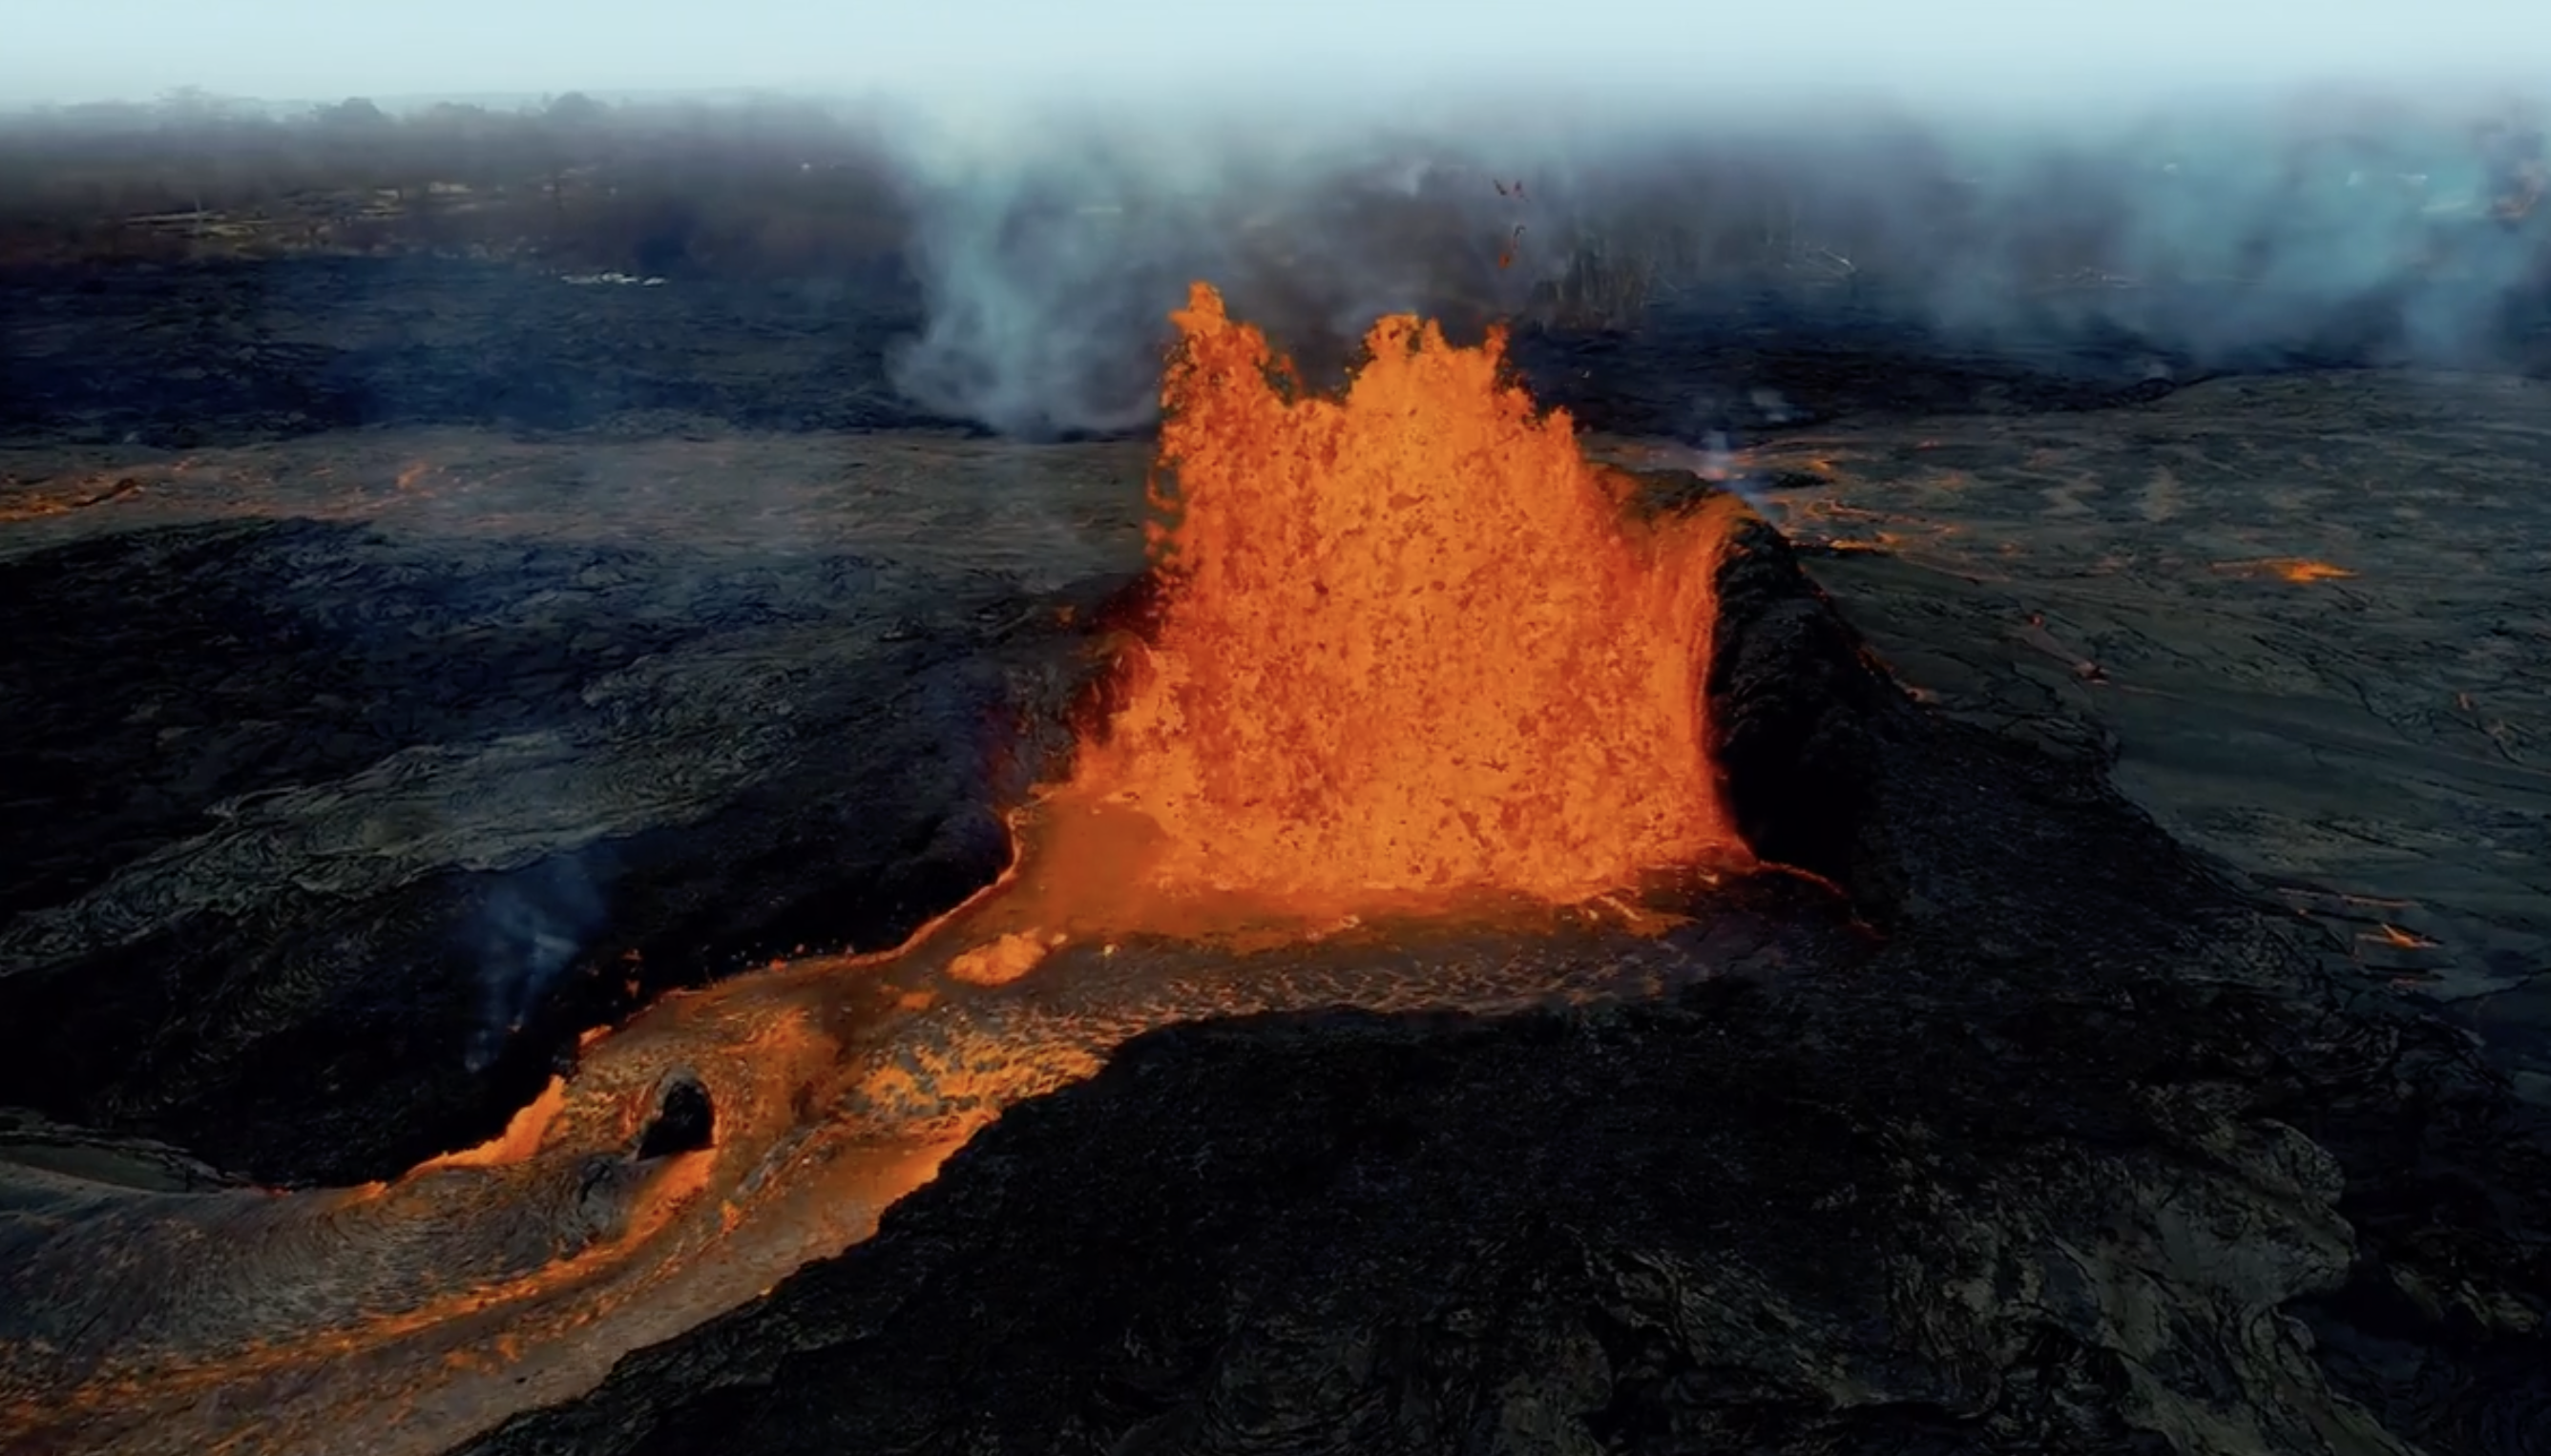 Bright orange lava splashes out from the mouth of a volcano and runs through a path on its side.